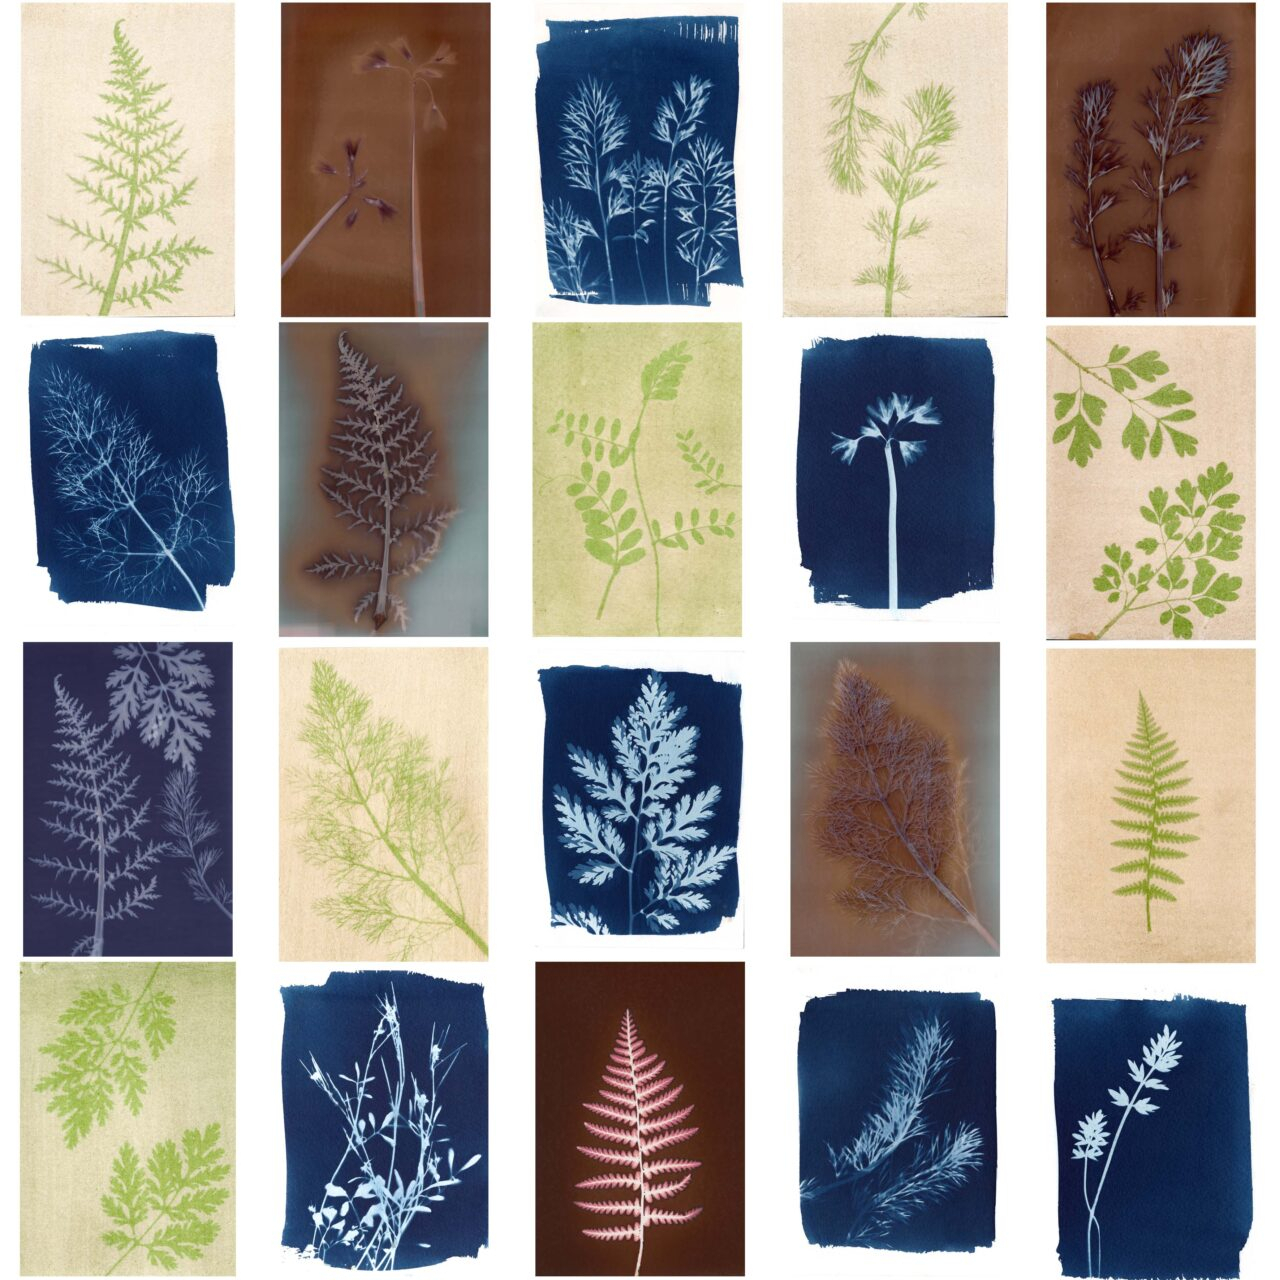 Botanical Printing With Alternative Photographic Processes With Lisa Lavery for How To Make Botnicalprinting